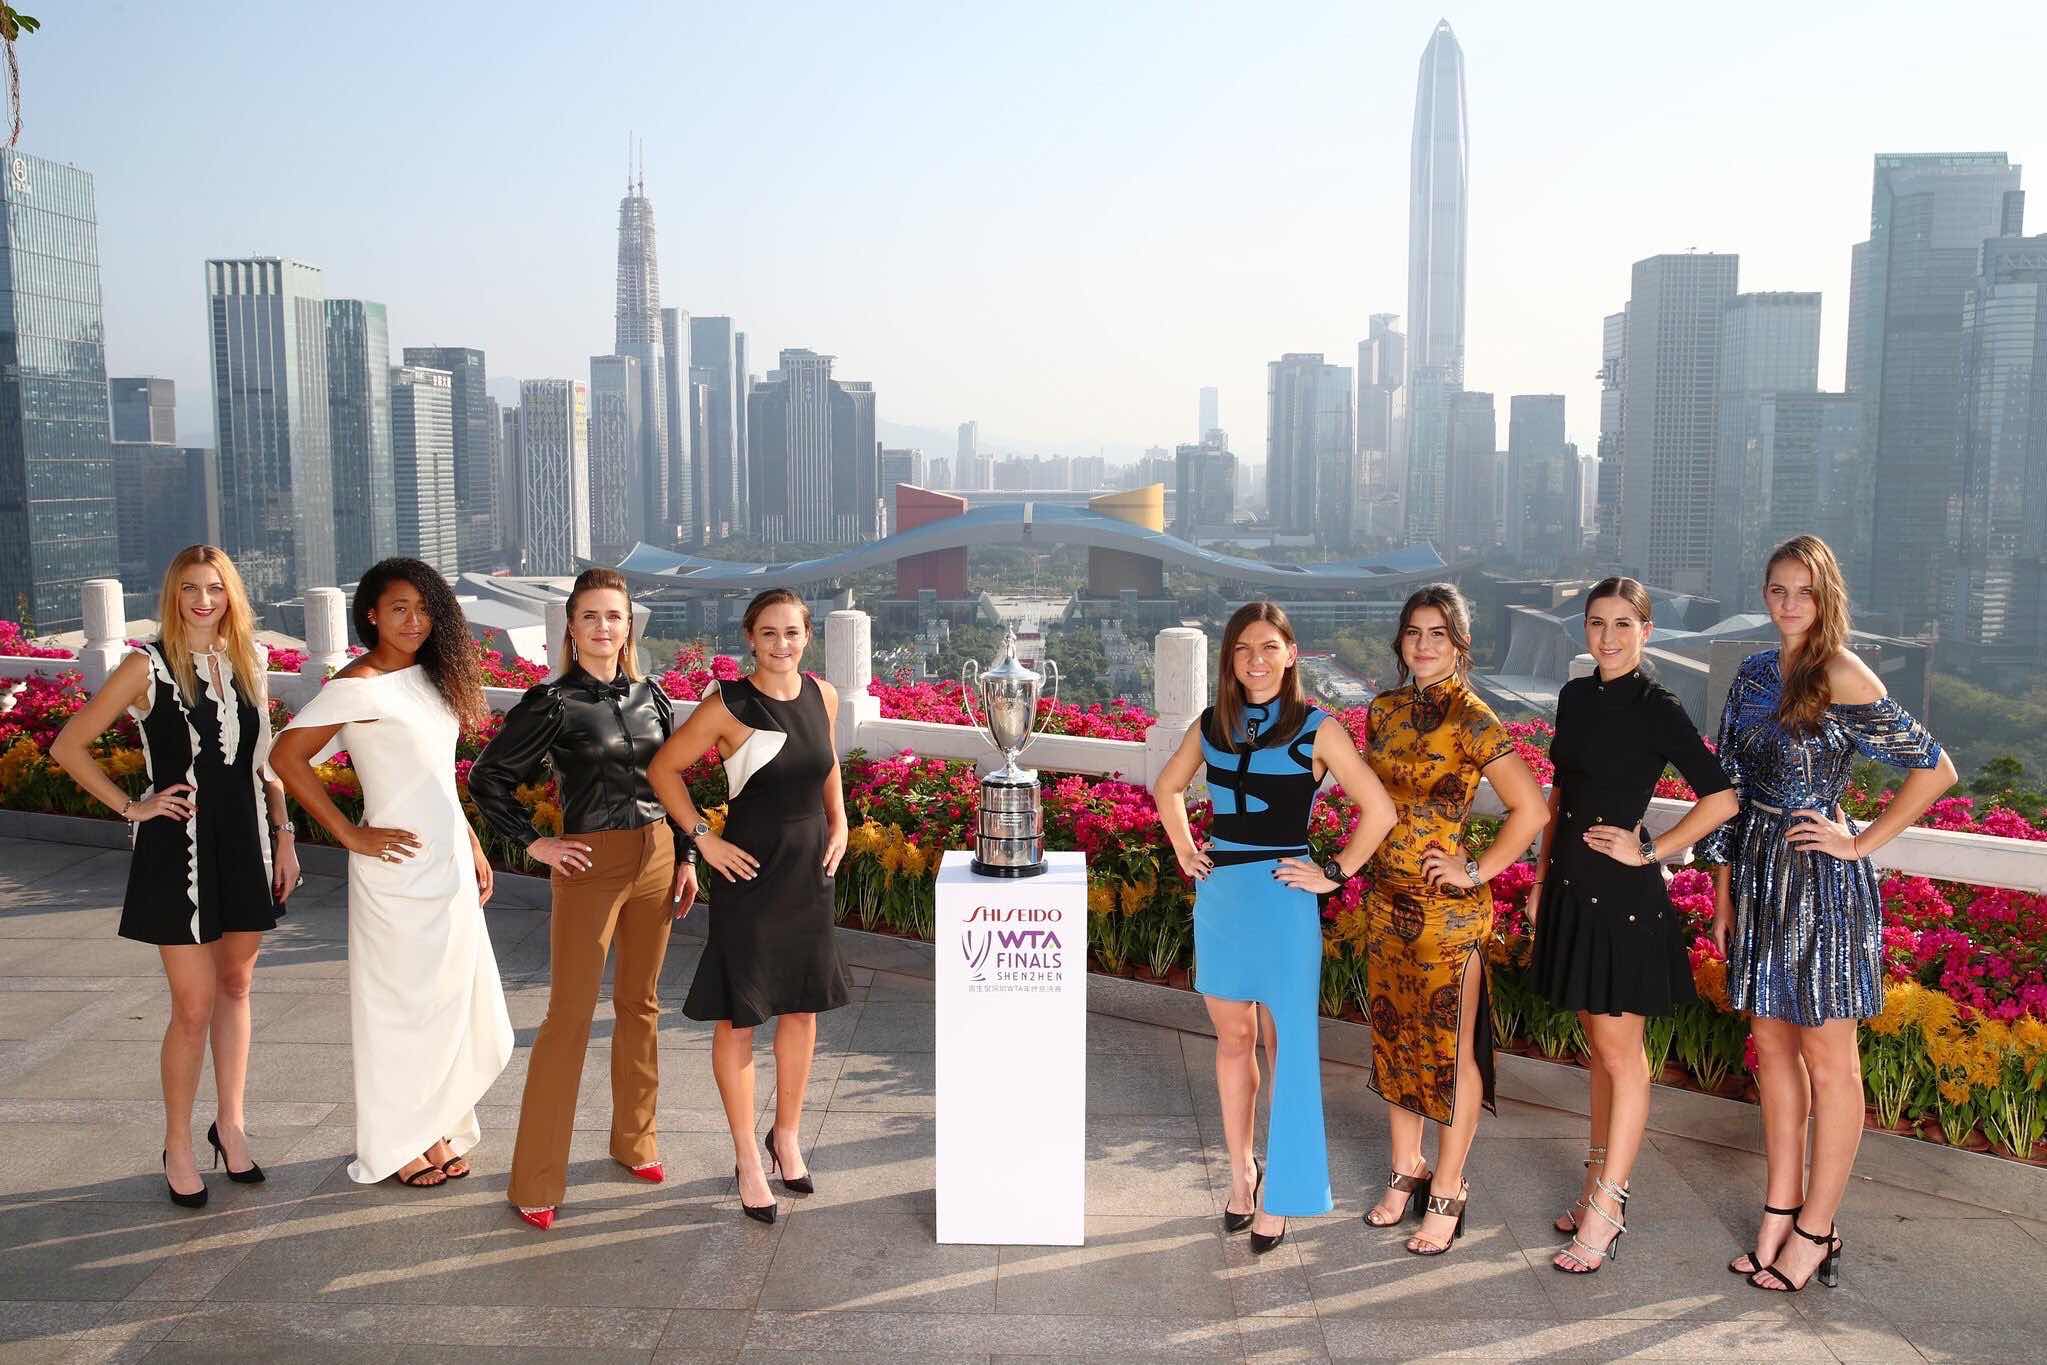 The top eight women with the WTA Finals trophy in Shenzhen, China. Photo credit: Women's Tennis Association (WTA)